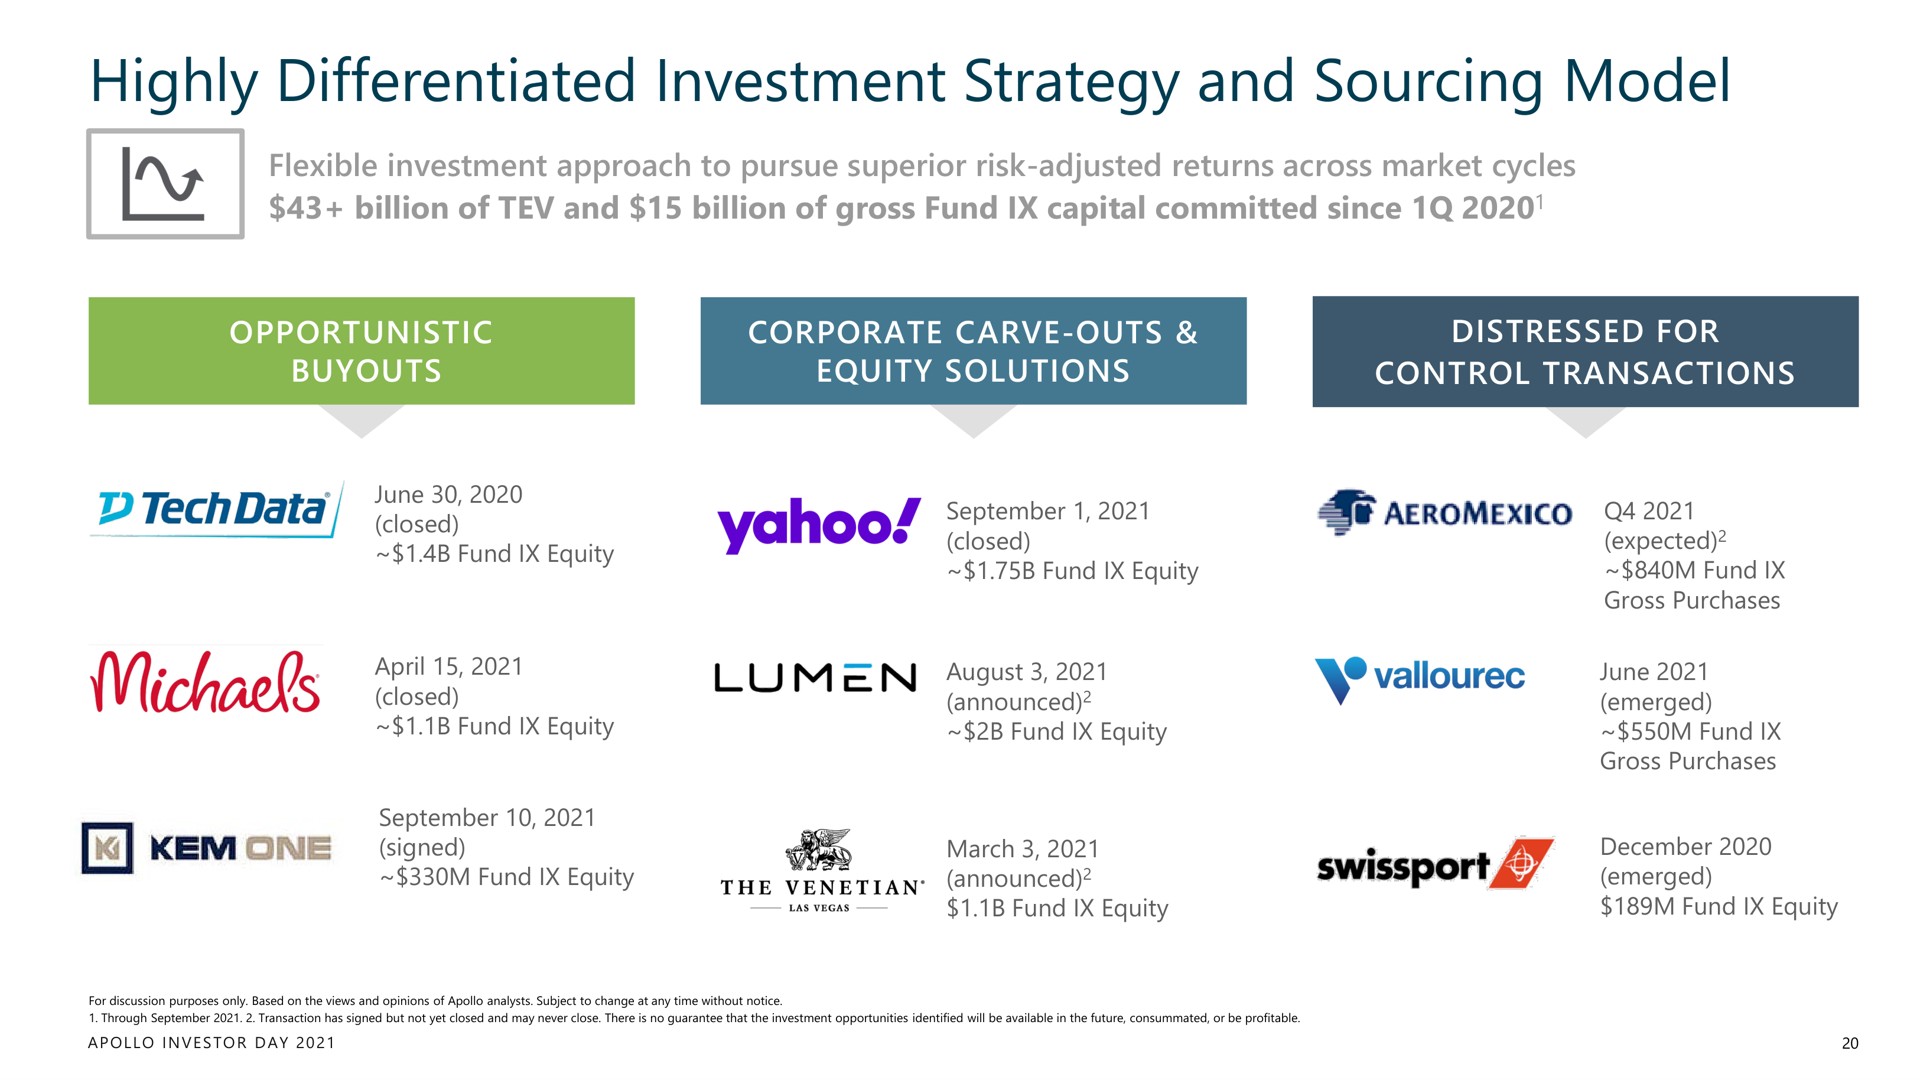 highly differentiated investment strategy and sourcing model | Apollo Global Management